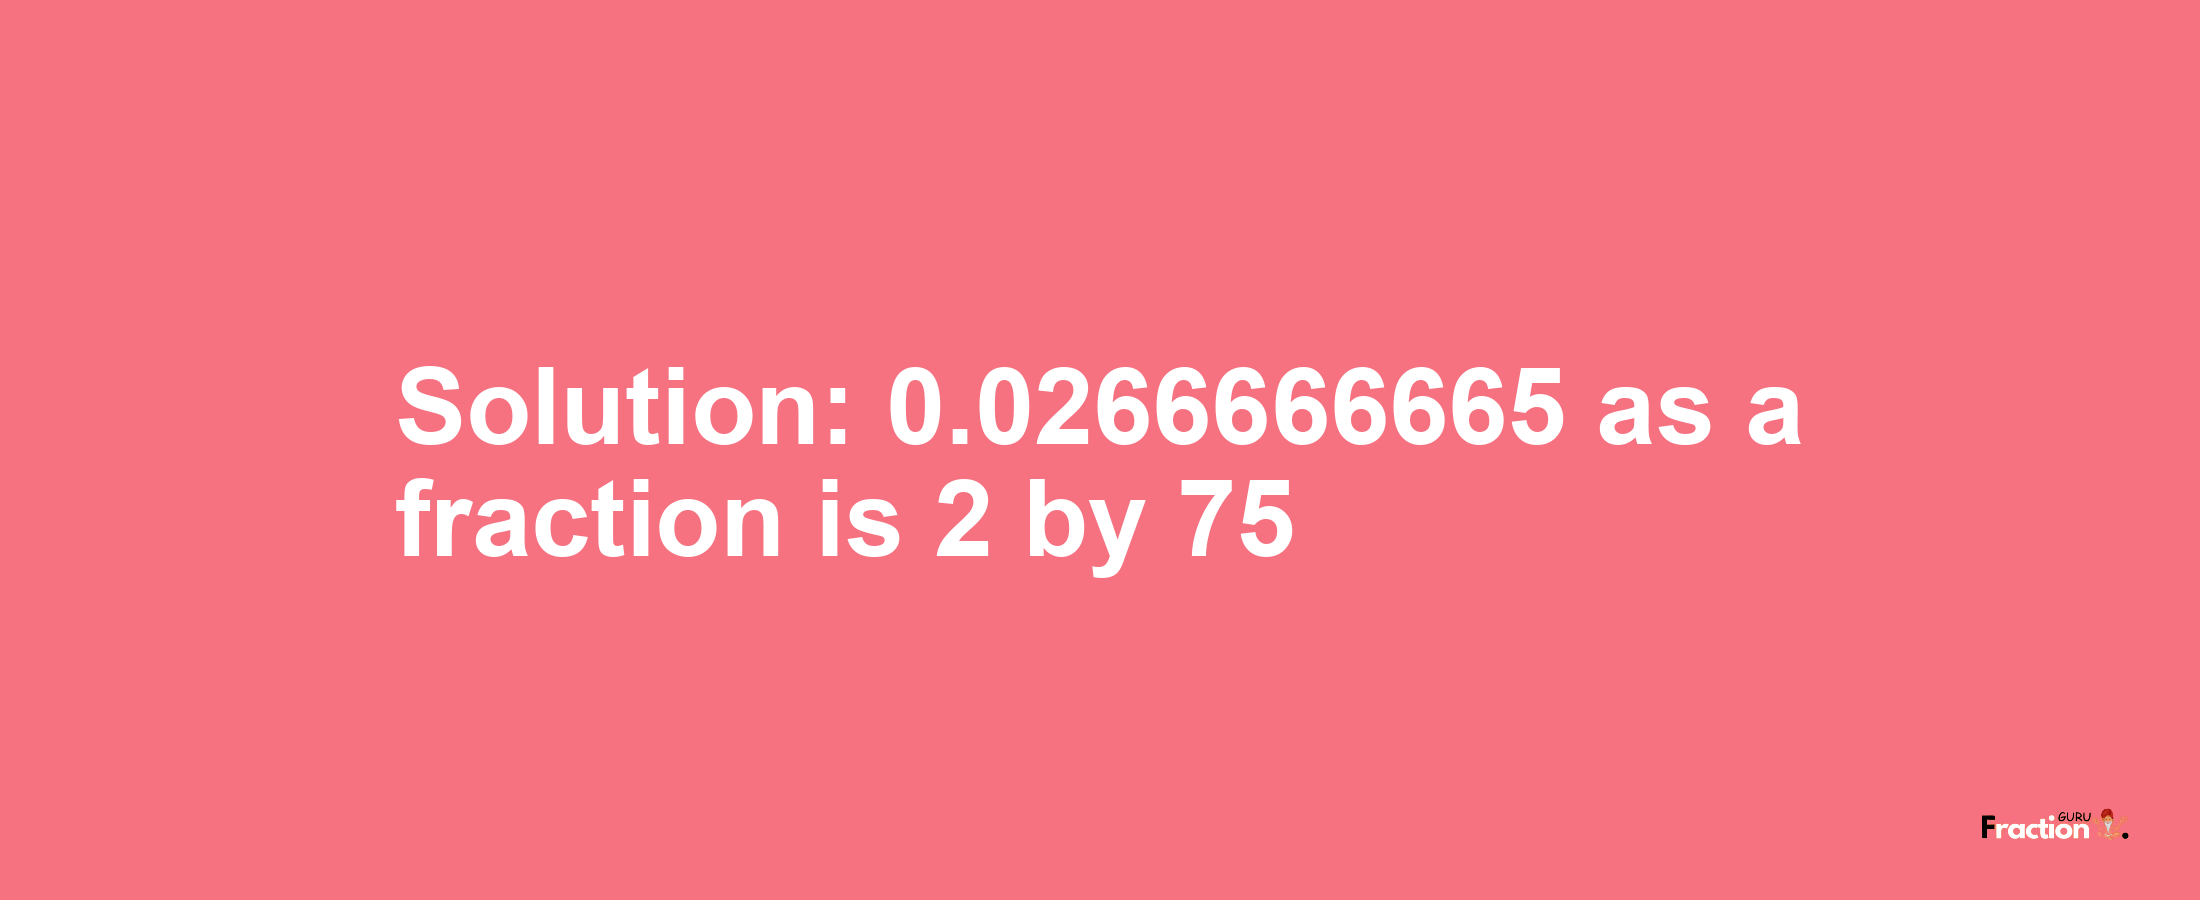 Solution:0.0266666665 as a fraction is 2/75